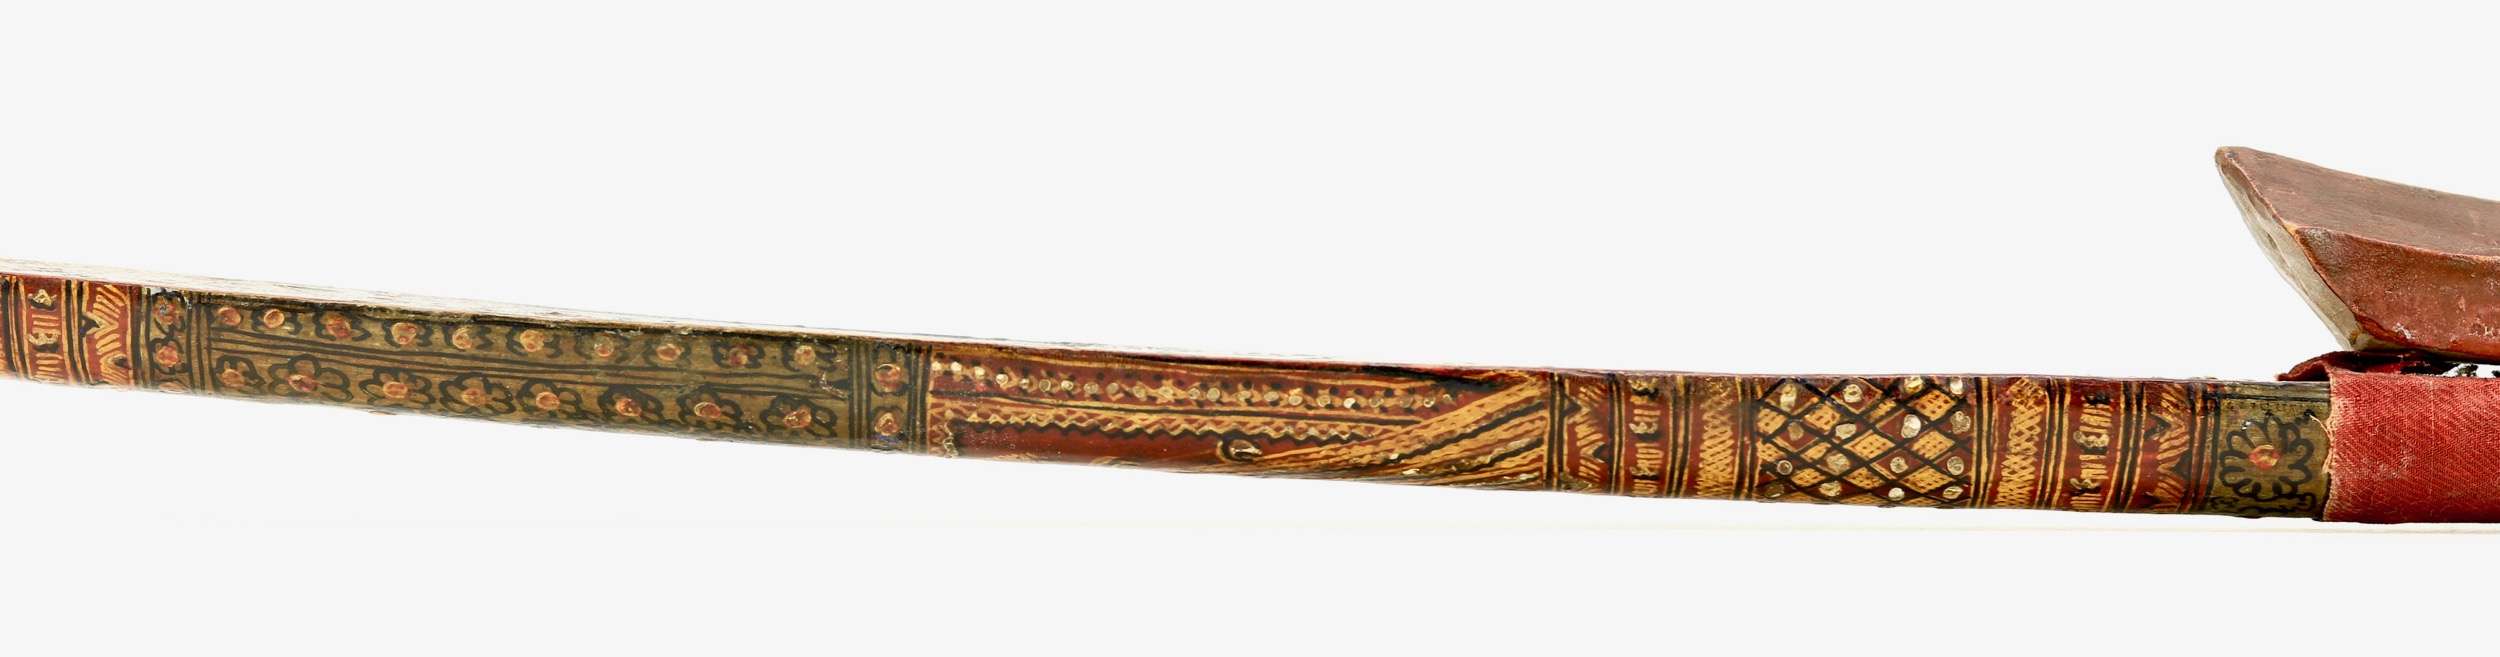 Sinew backed bow from Kashmir